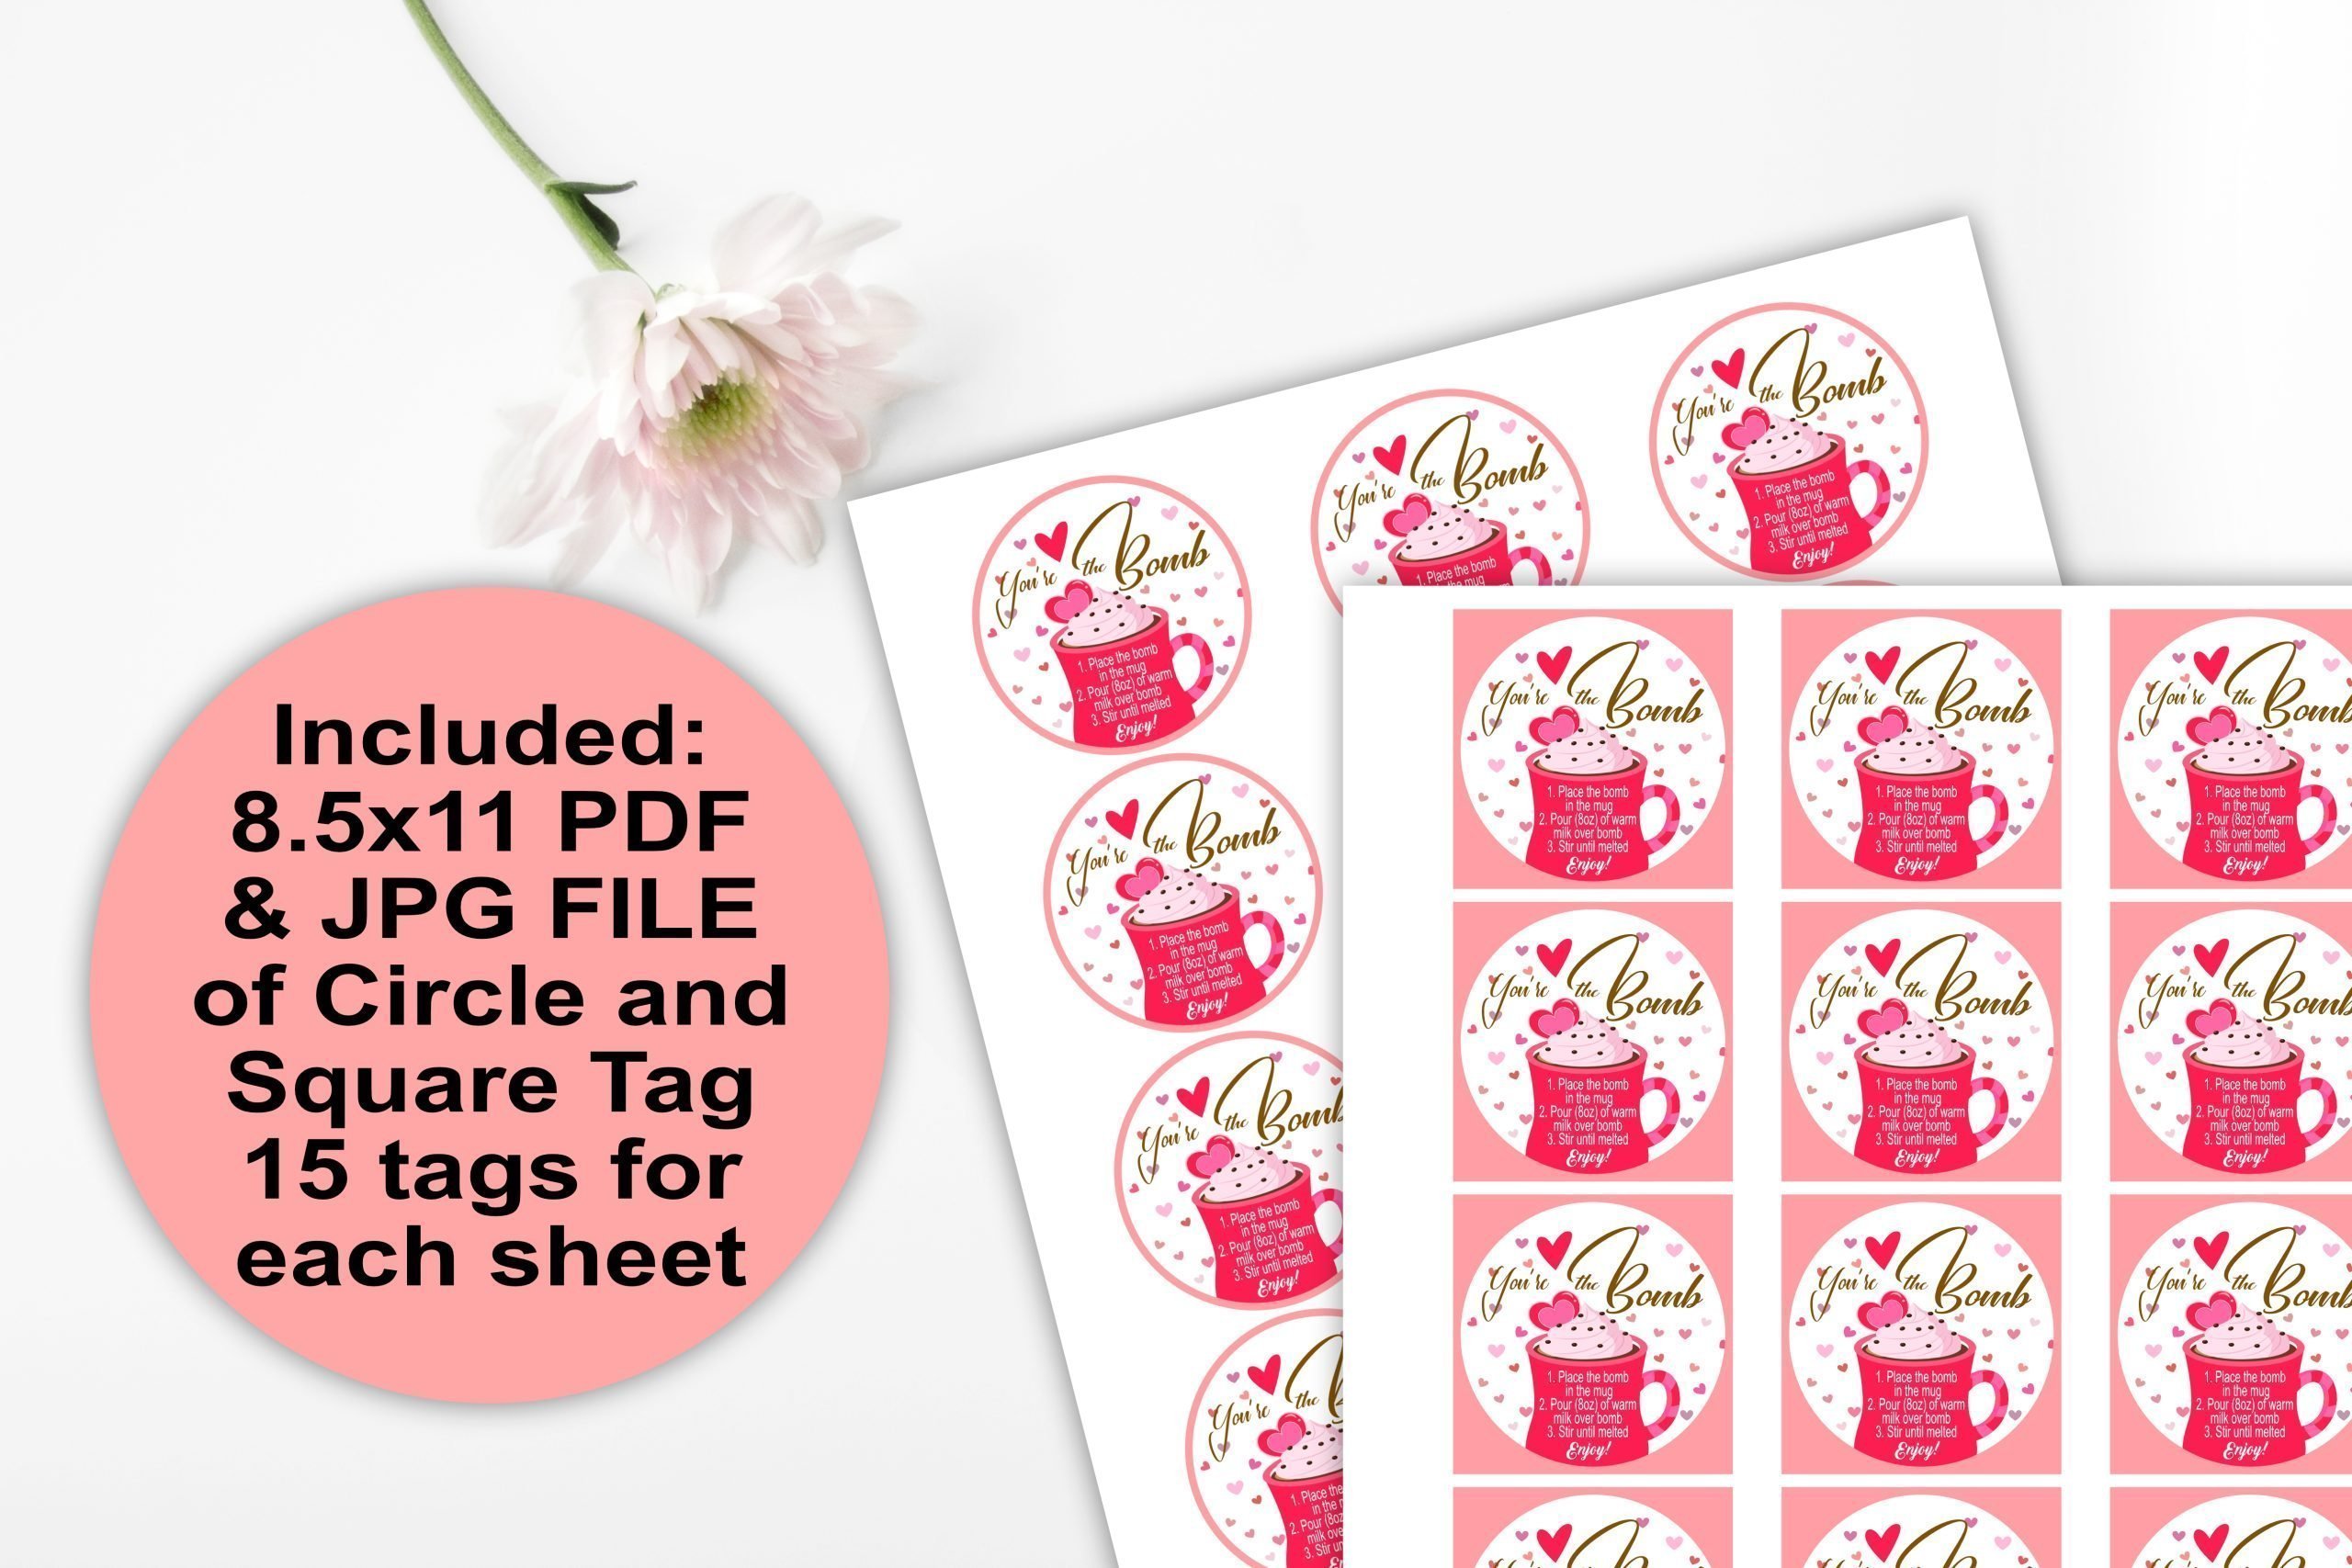 HOLIDAY Valentine You’re the Bomb Hot Chocolate Bomb Tag, PRINTABLE 2x2" size